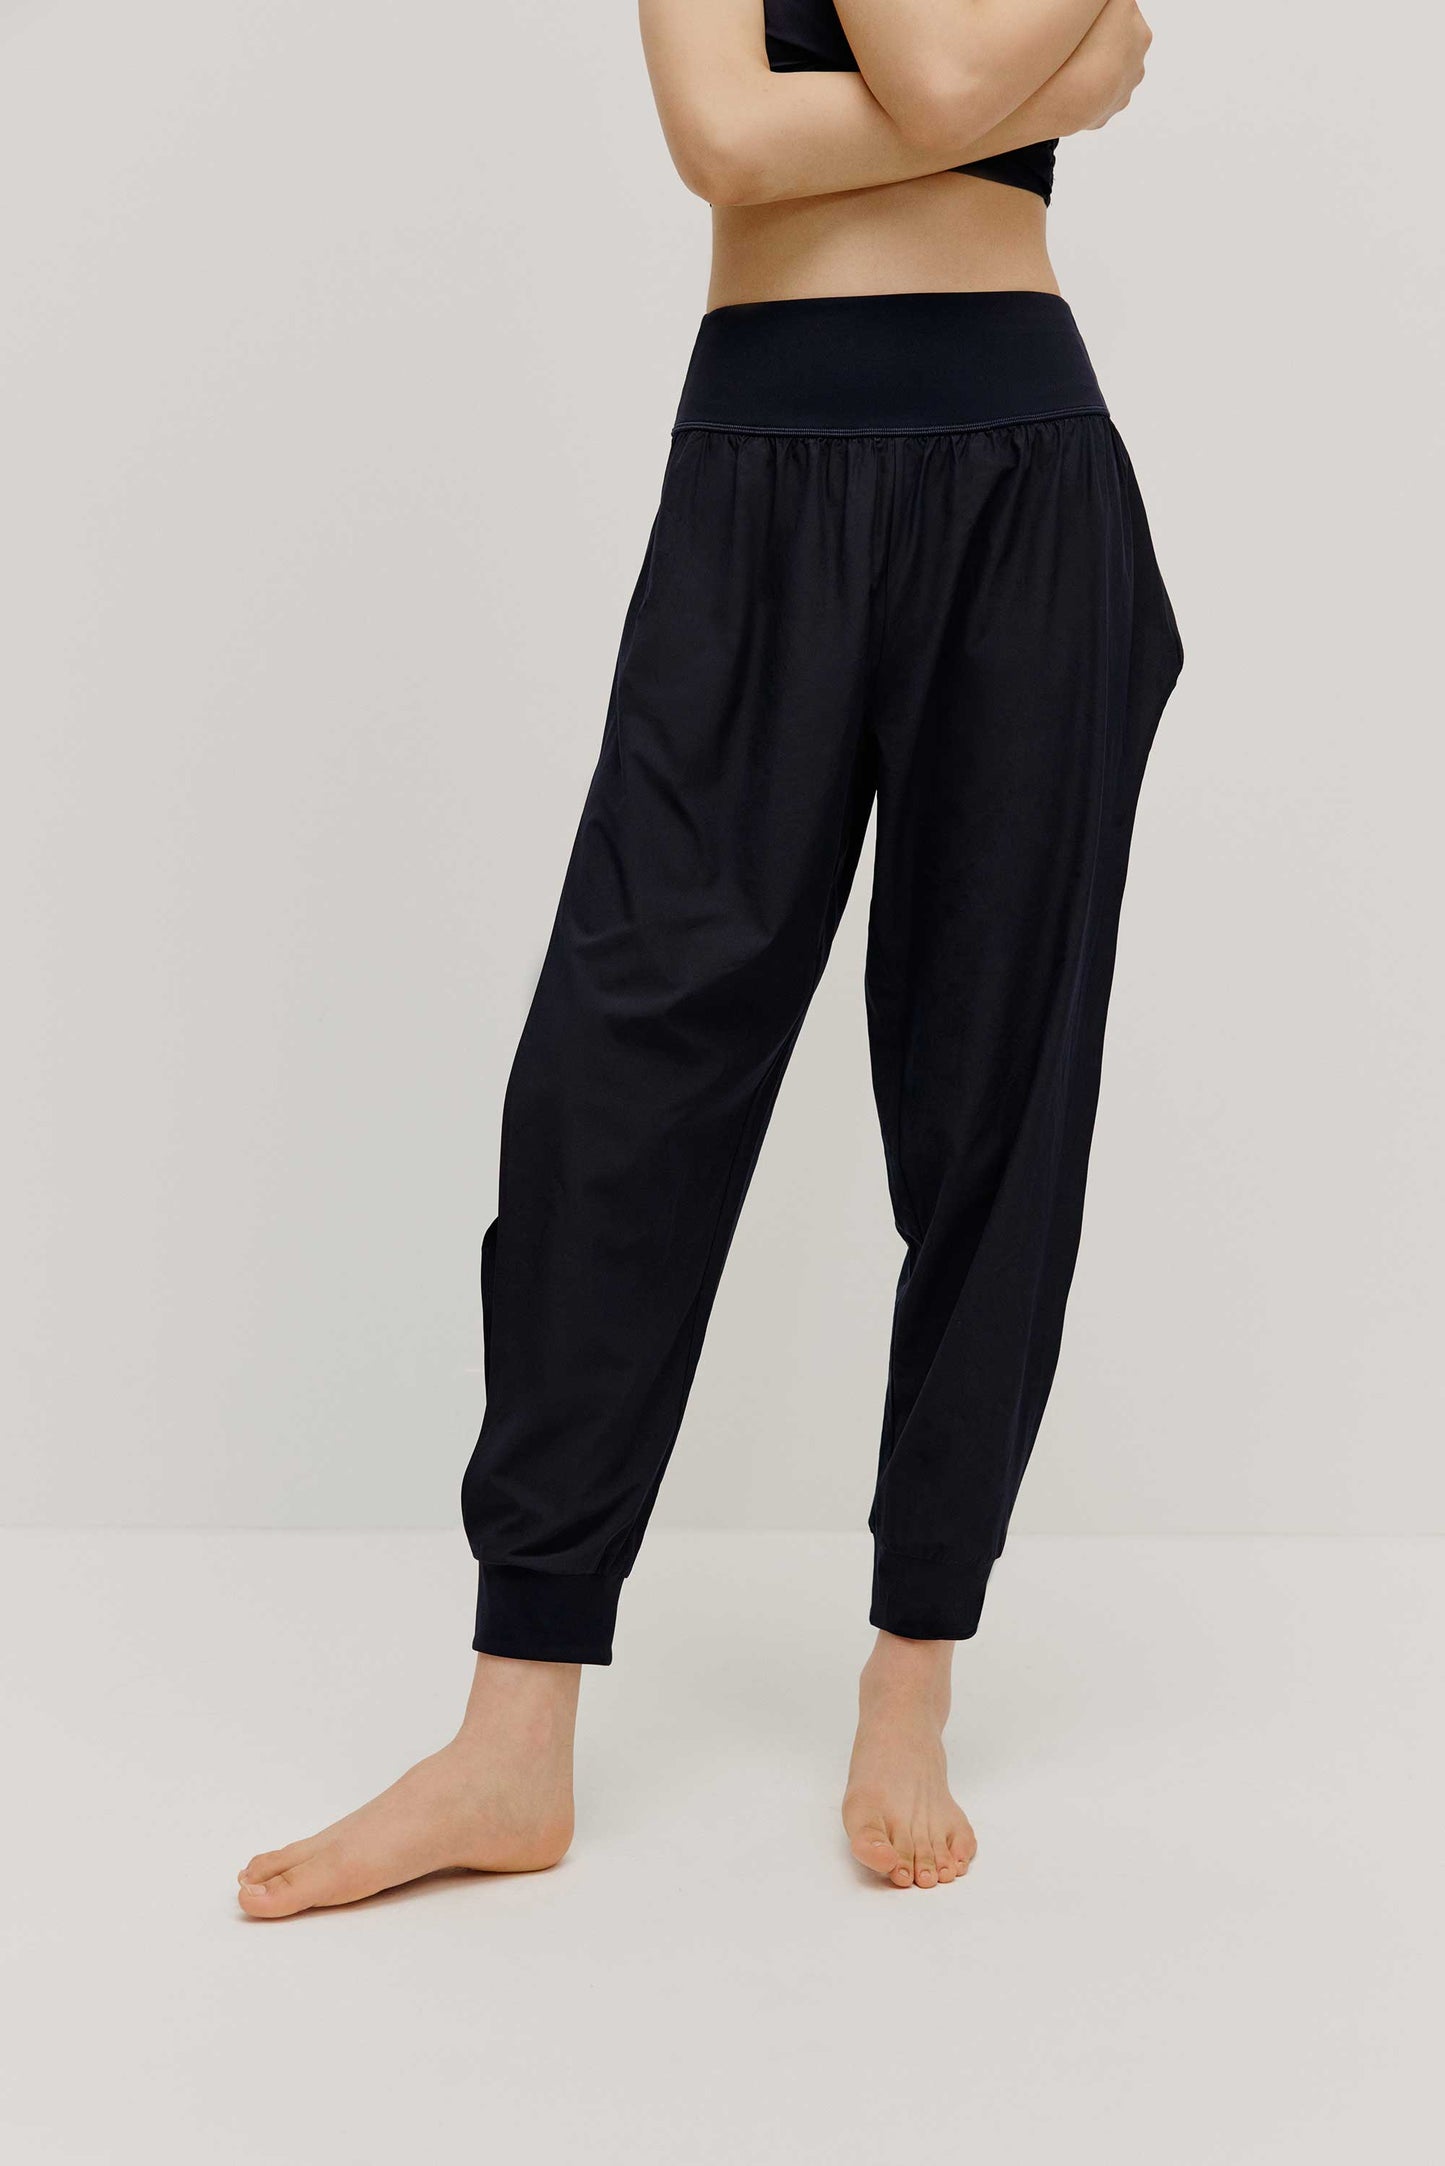 The front view of a woman wearing a pair of black tapered joggers with side slits